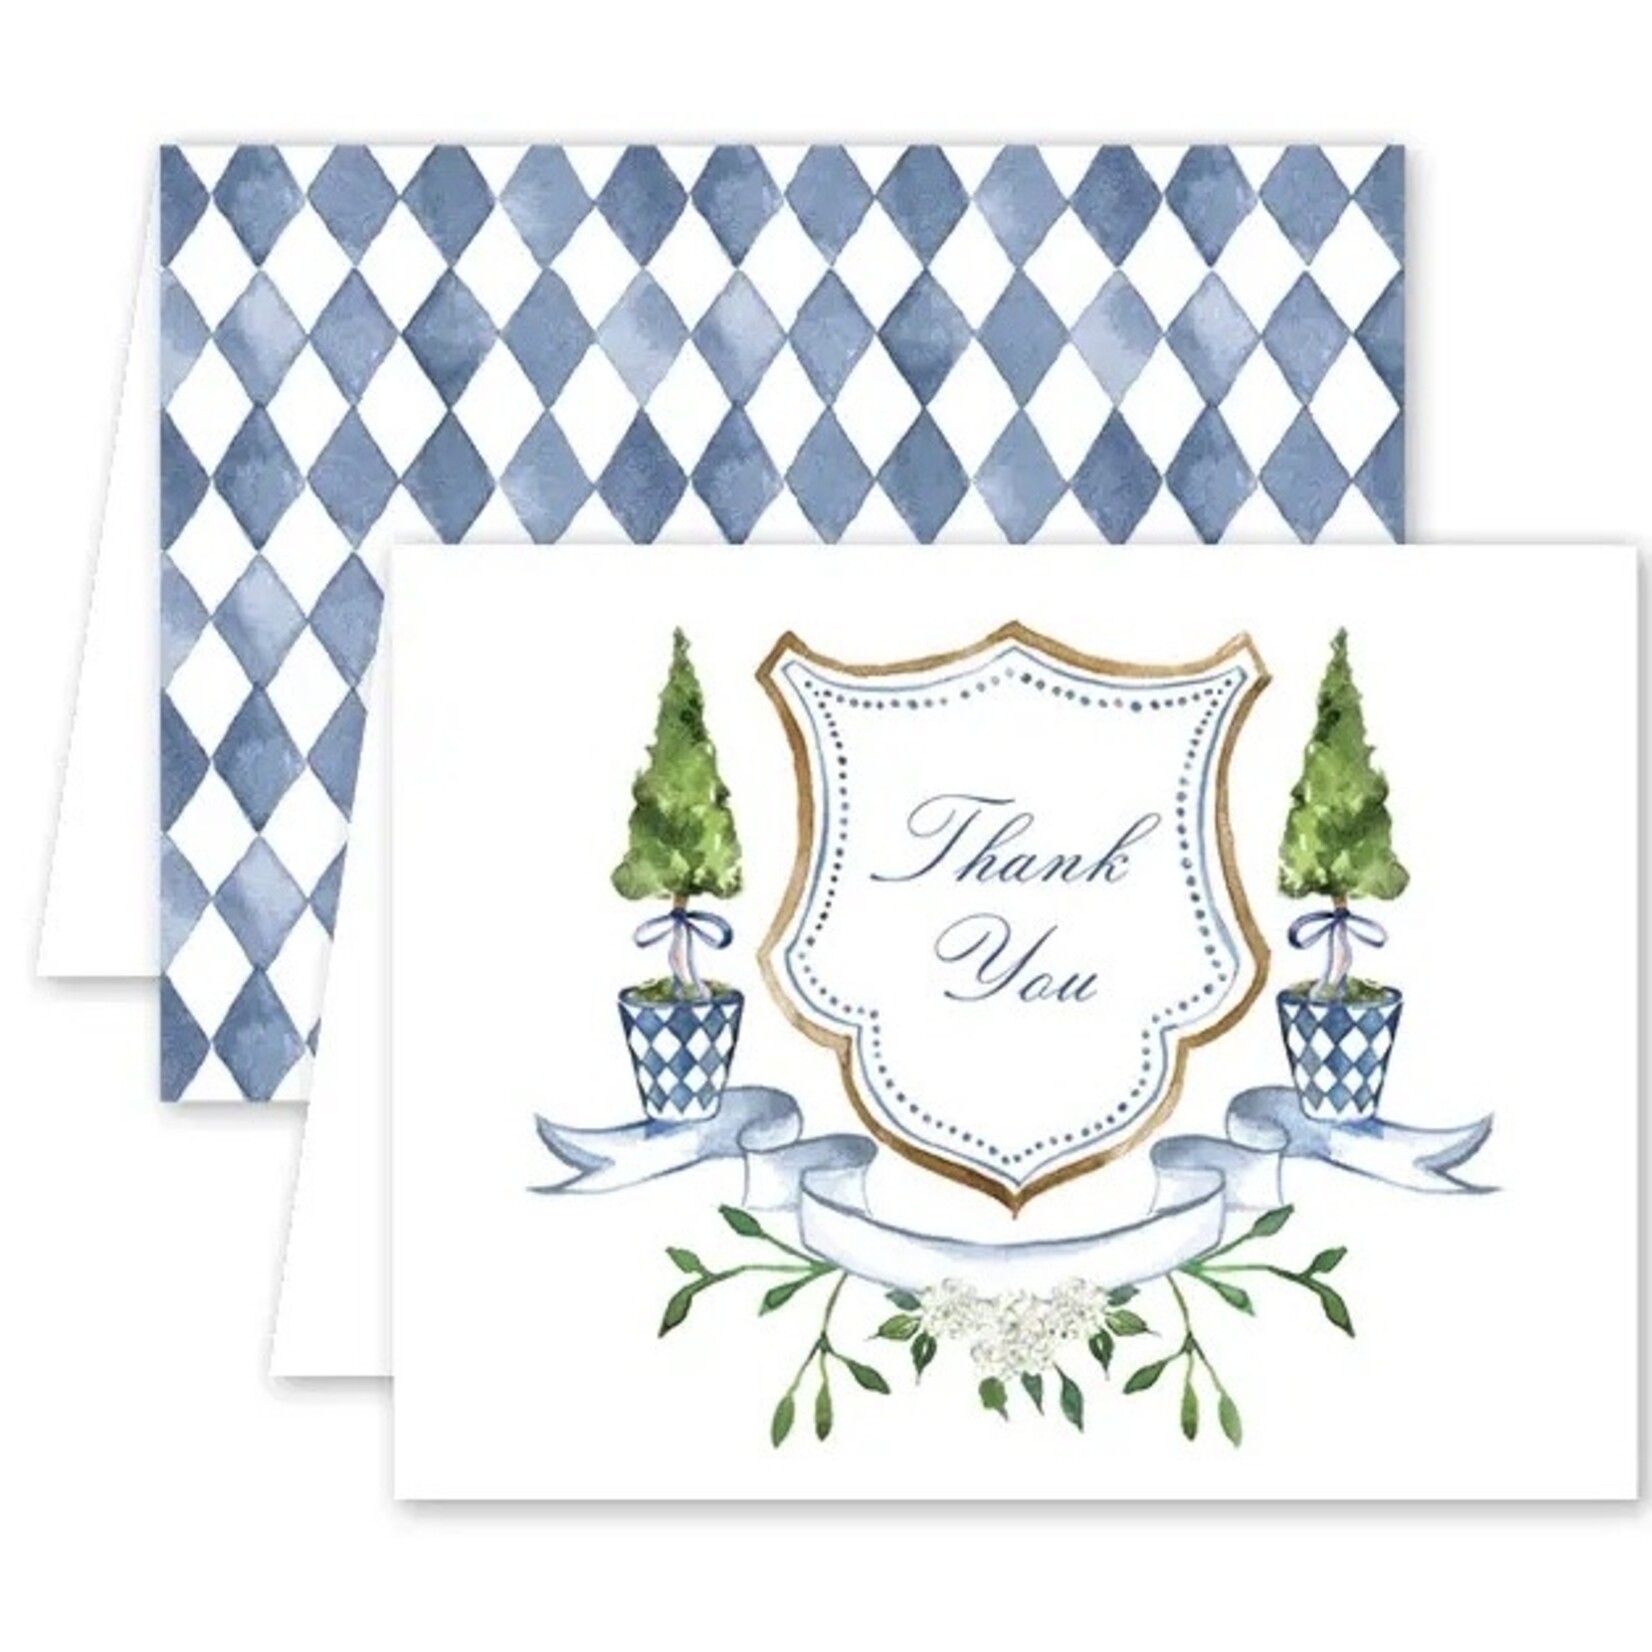 Dogwood Hill BLUE TOPIARY CREST THANK YOU CARD - 8 Cards/Envelopes